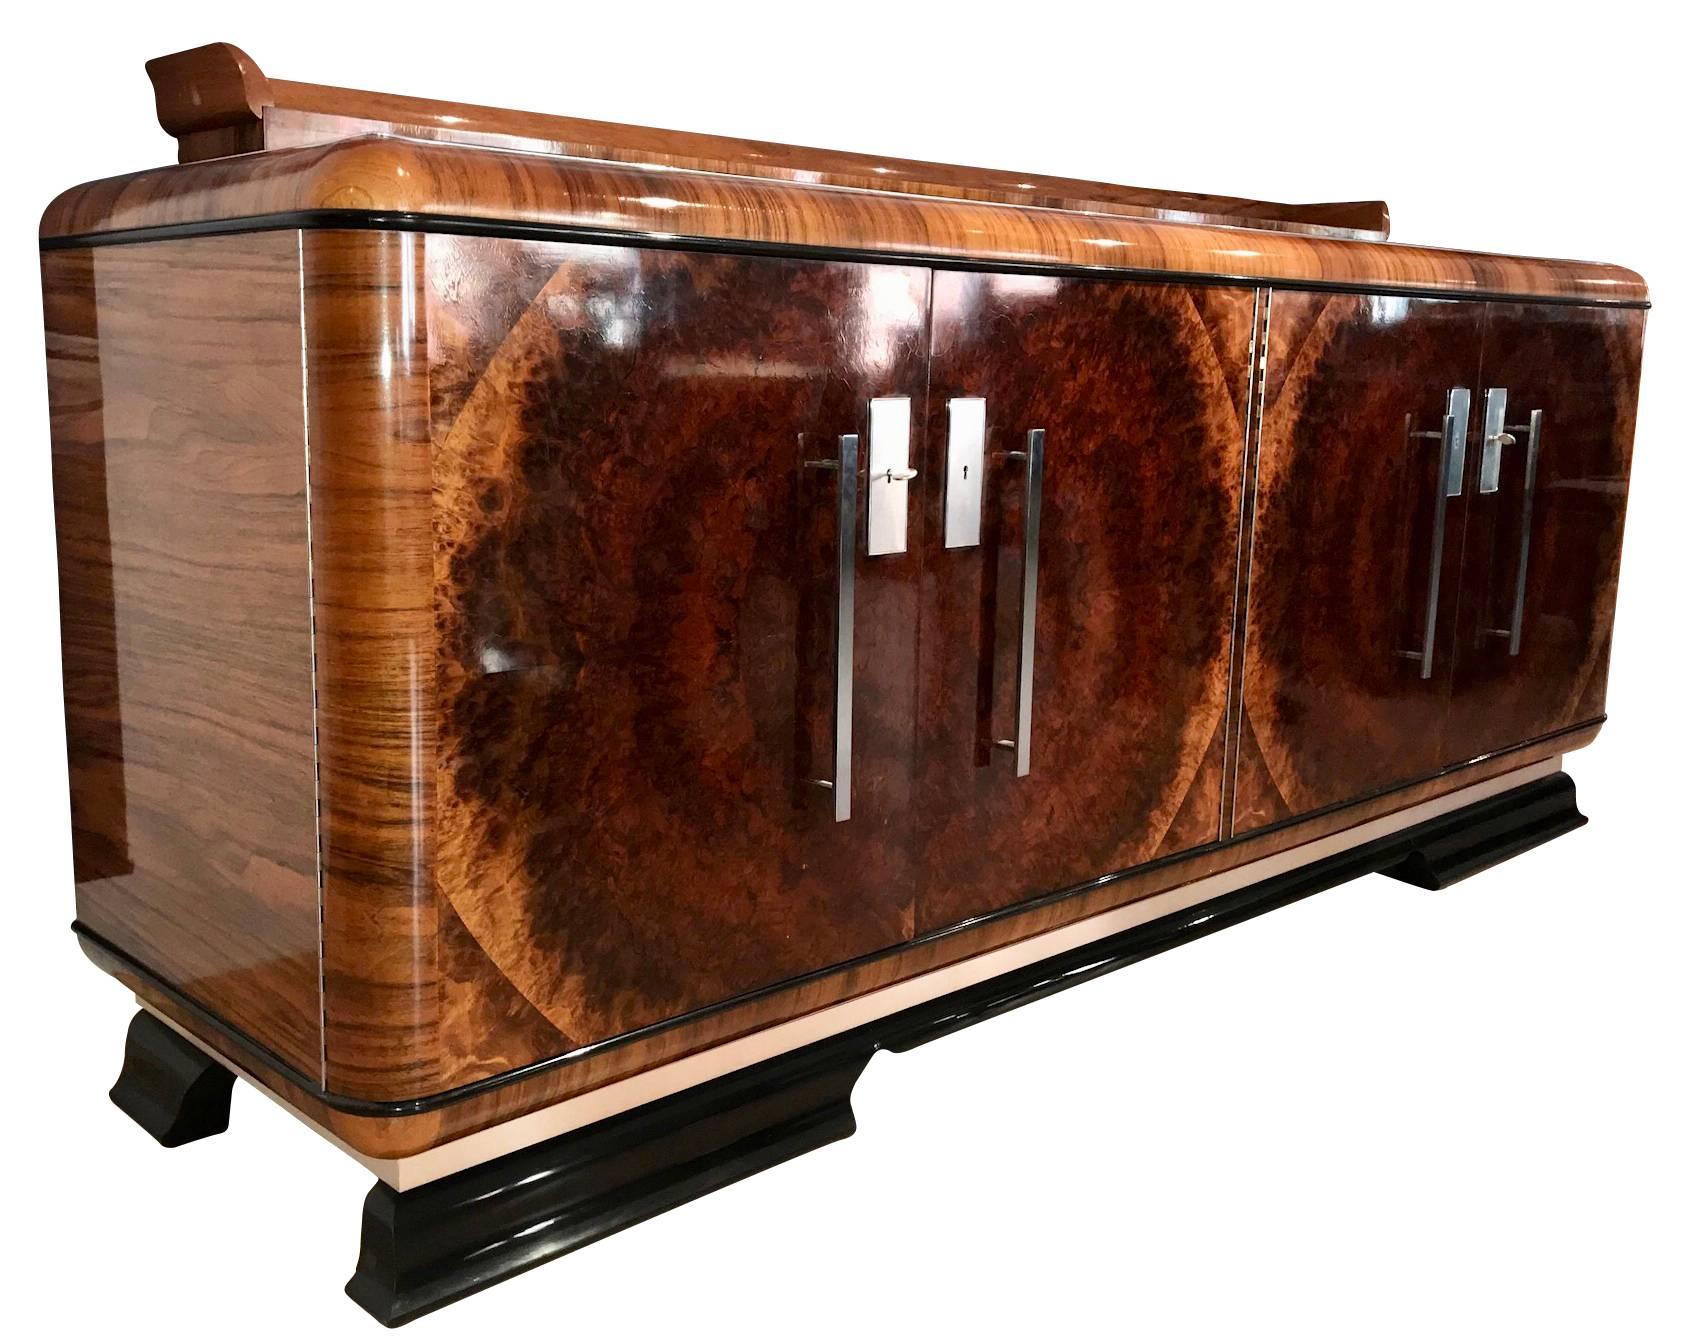 Large Bauhaus Sideboard from Germany around 1930.

The highlight is the gorgeous round book-matched walnut veneer on the four doors. 
At the sides and inside the doors there is a more straightened walnut veneer and several ebonized parts.

Brushed